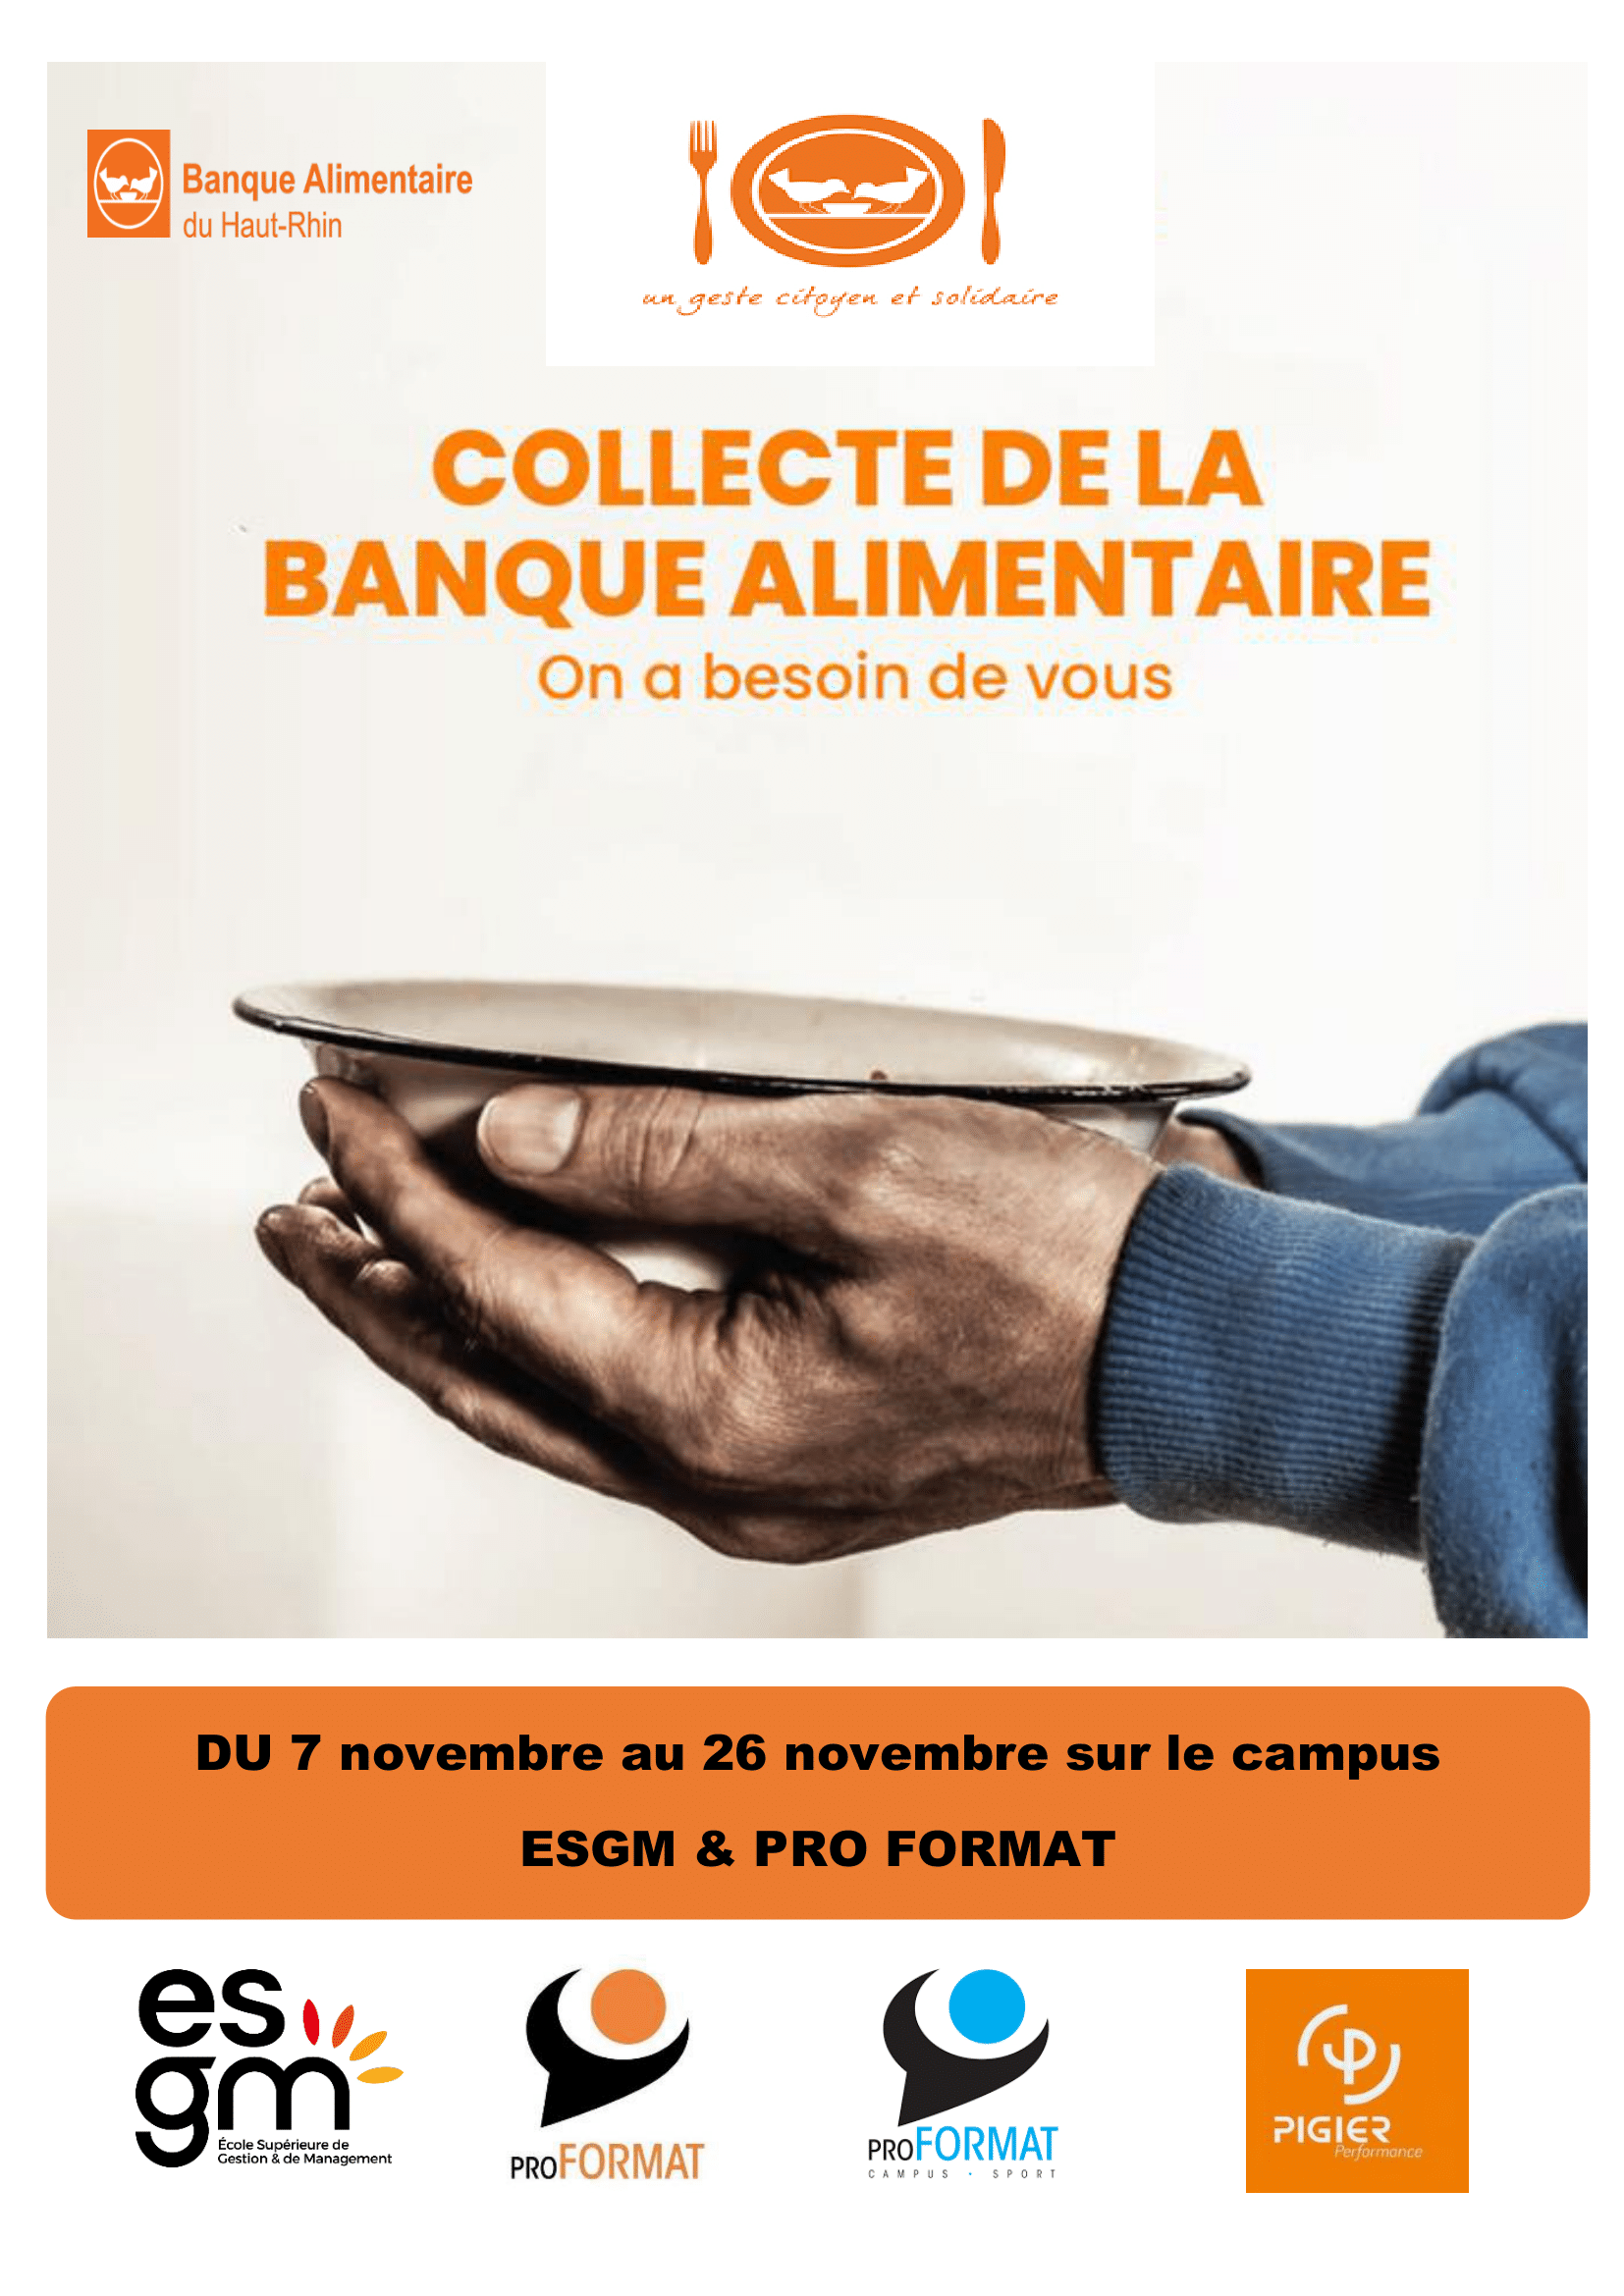 Banque-alimentaire-1-1